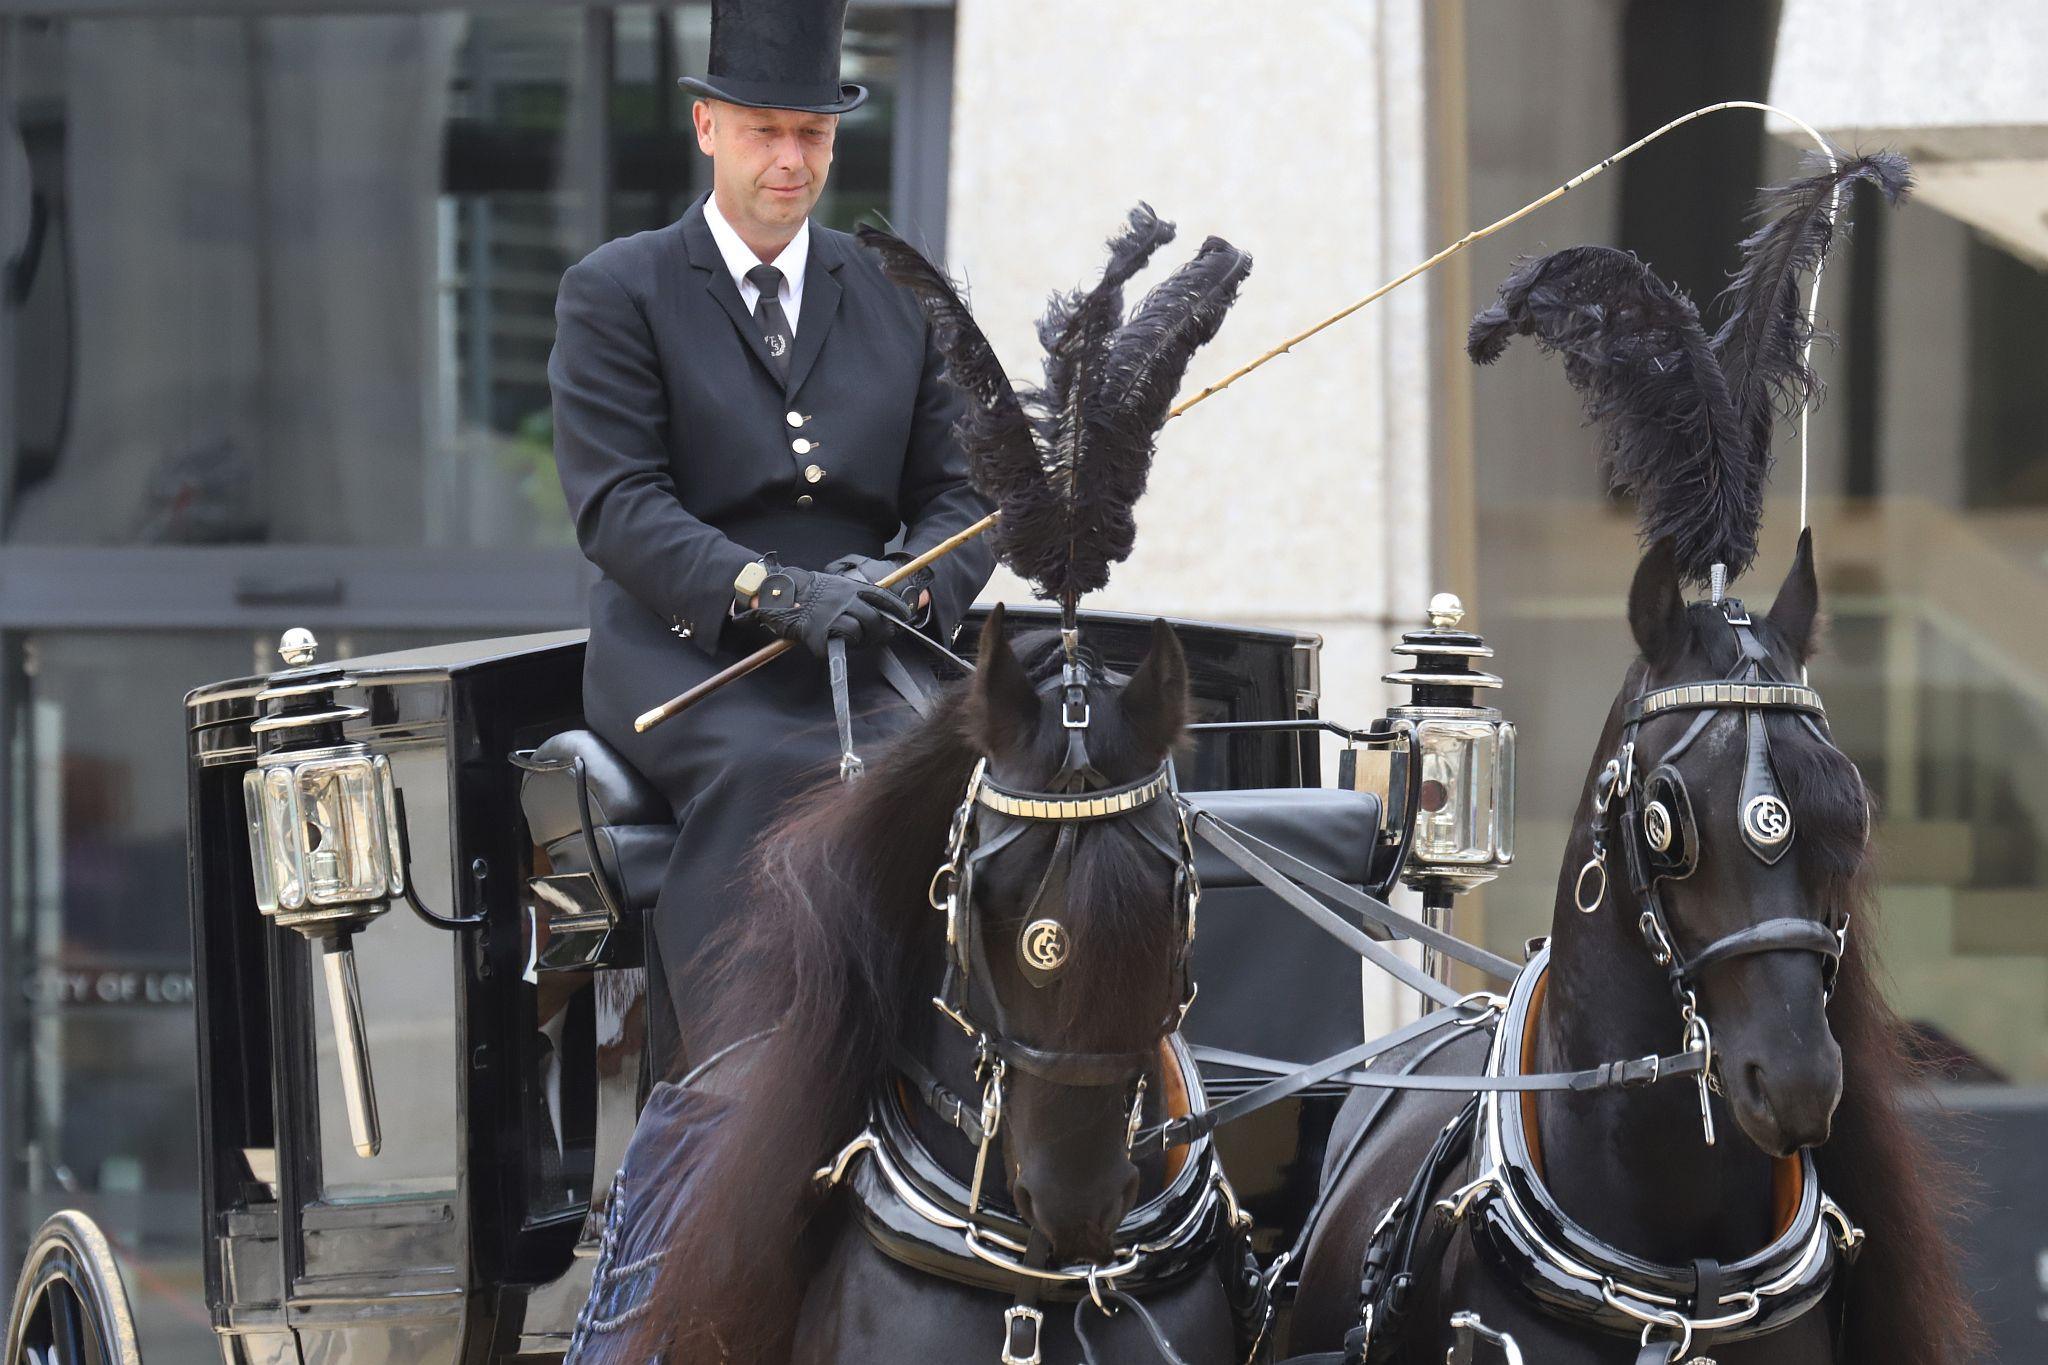 Horse Drawn Marsden Mourning Coach 1890. City of London 2023 Cart Marking in Guildhall Yard on 22-Jul-2023. Hosted by the Worshipful Company of Carmen with the Lord Mayor of the City of London in attendance. Wooden plates on the vehicles are branded with hot irons to allow them to ply for trade in the Square Mile. Another of the City Livery Company's annual ceremonies.